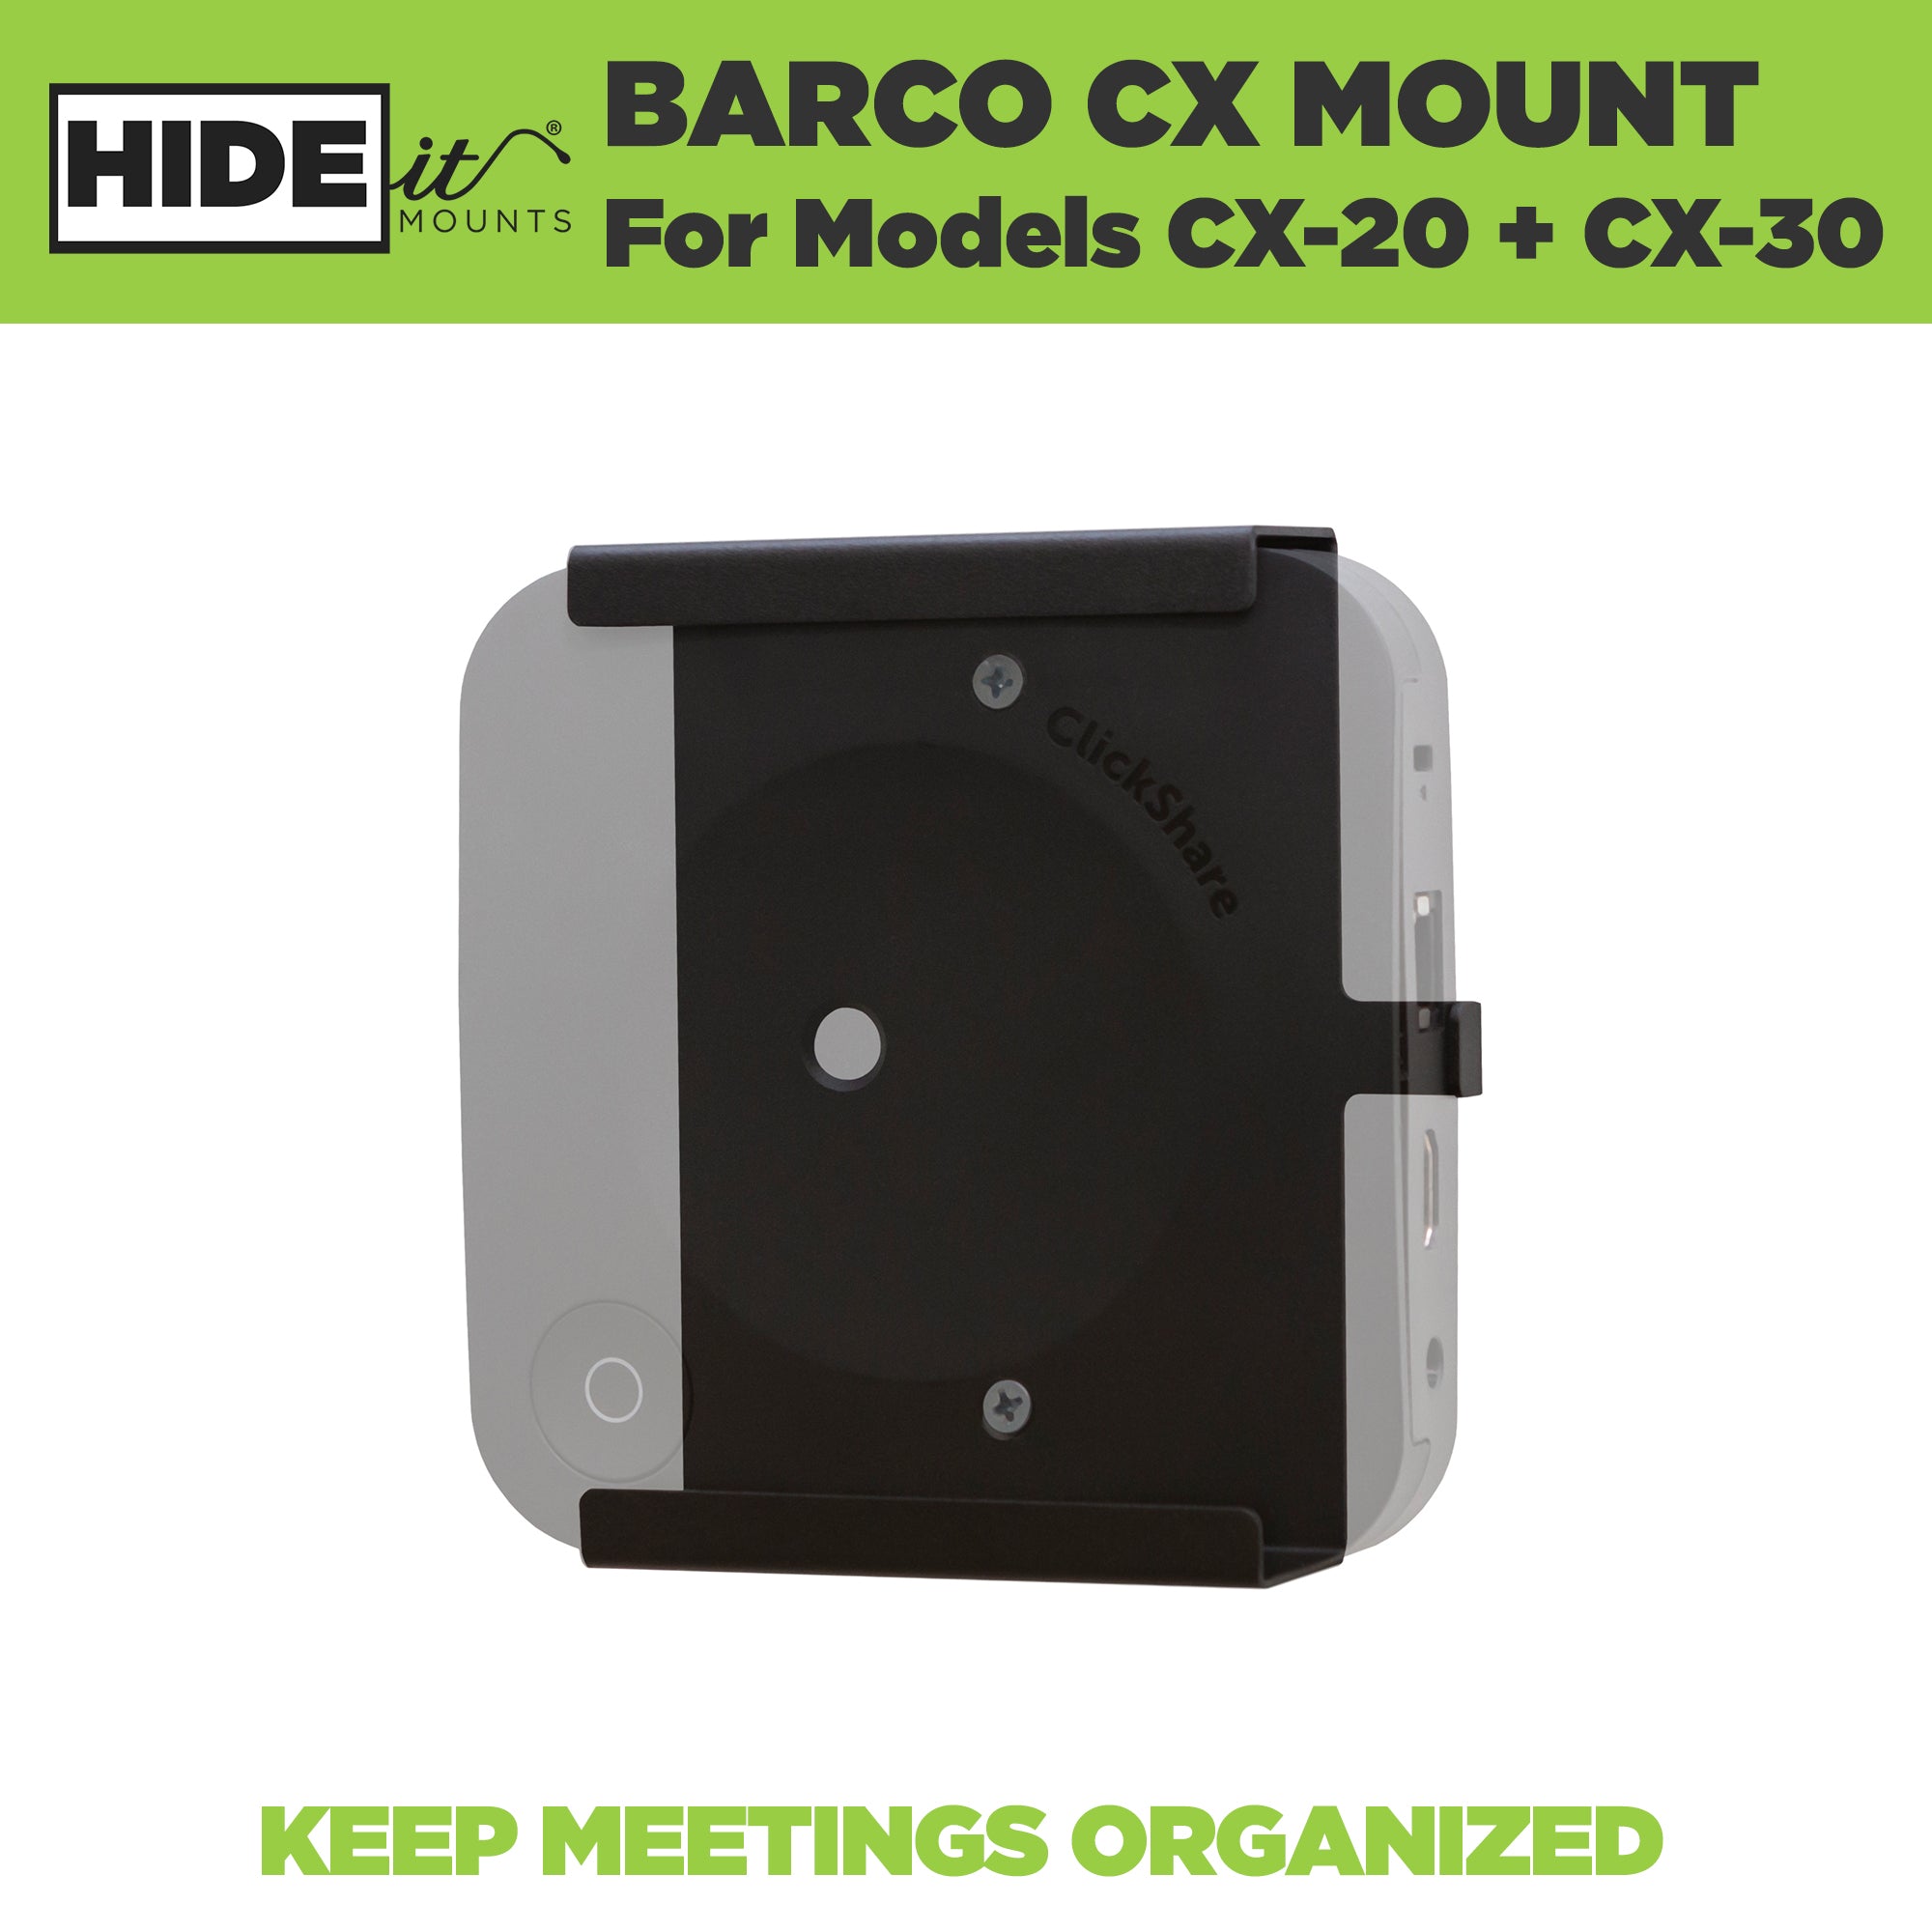 Barco ClickShare CX-20 greyed out in the HIDEit Barco CX Wall Mount. Keep your Barco Clickshares organized when mounted to the wall!